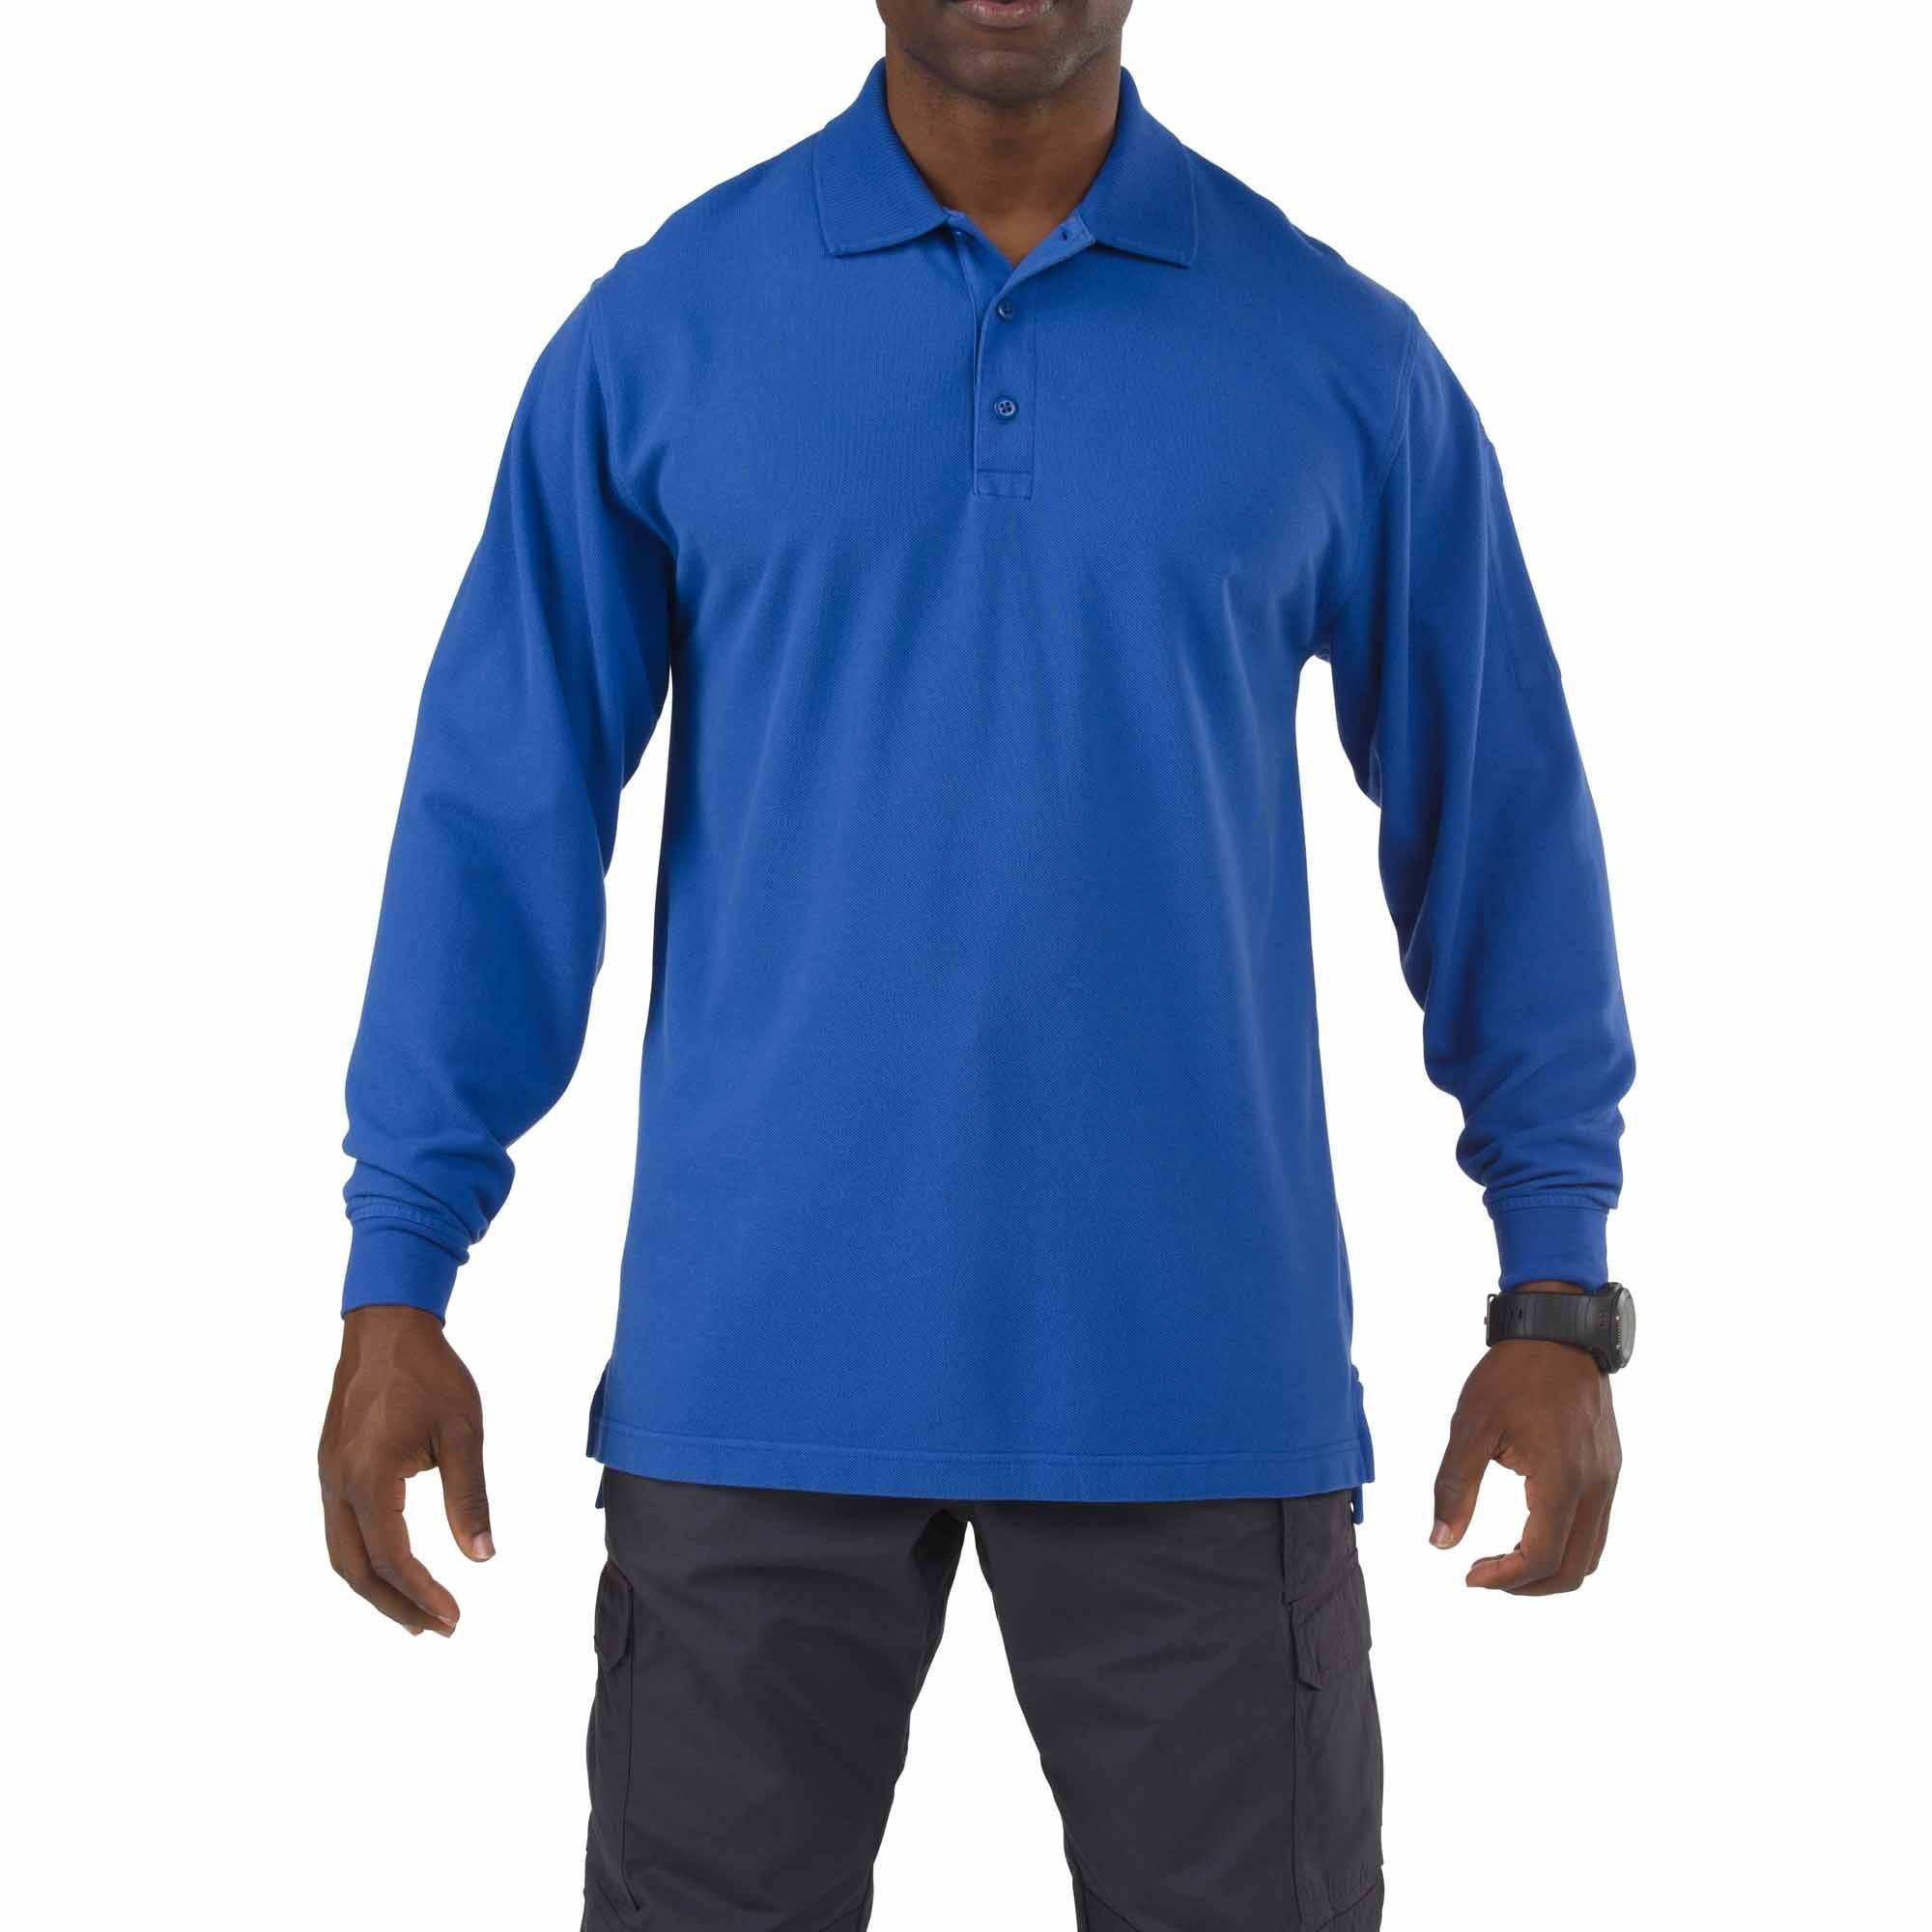 5.11 Work Gear Men's Professional Long Sleeve Polo Shirt, Cotton Pique  Knit, Reinforced Seams, Academy Blue, 2X-Large, Style 42056 